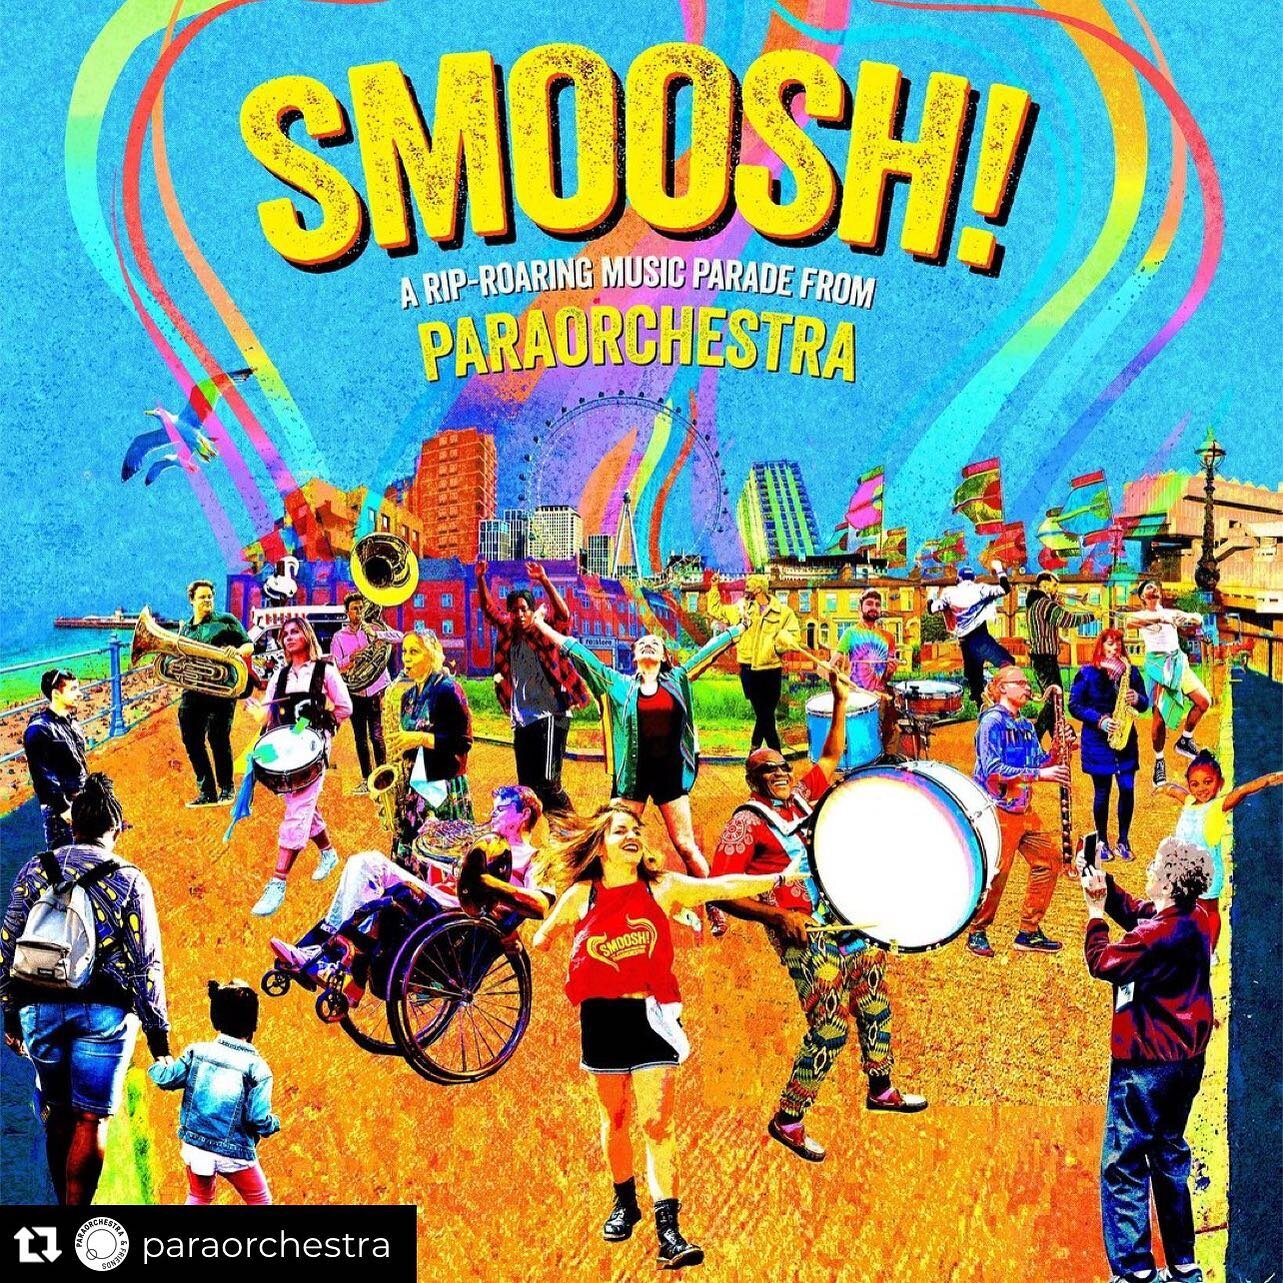 New illustration work for Smoosh! By Paraorchestra. Wonderful rip-roaring parade!!

Repost from @paraorchestra
&bull;
SMOOSH! is coming to @GlastoFest! 🎪
 
Hot on the heels of performances in the streets of Plaistow and the Southbank Centre, we&rsqu